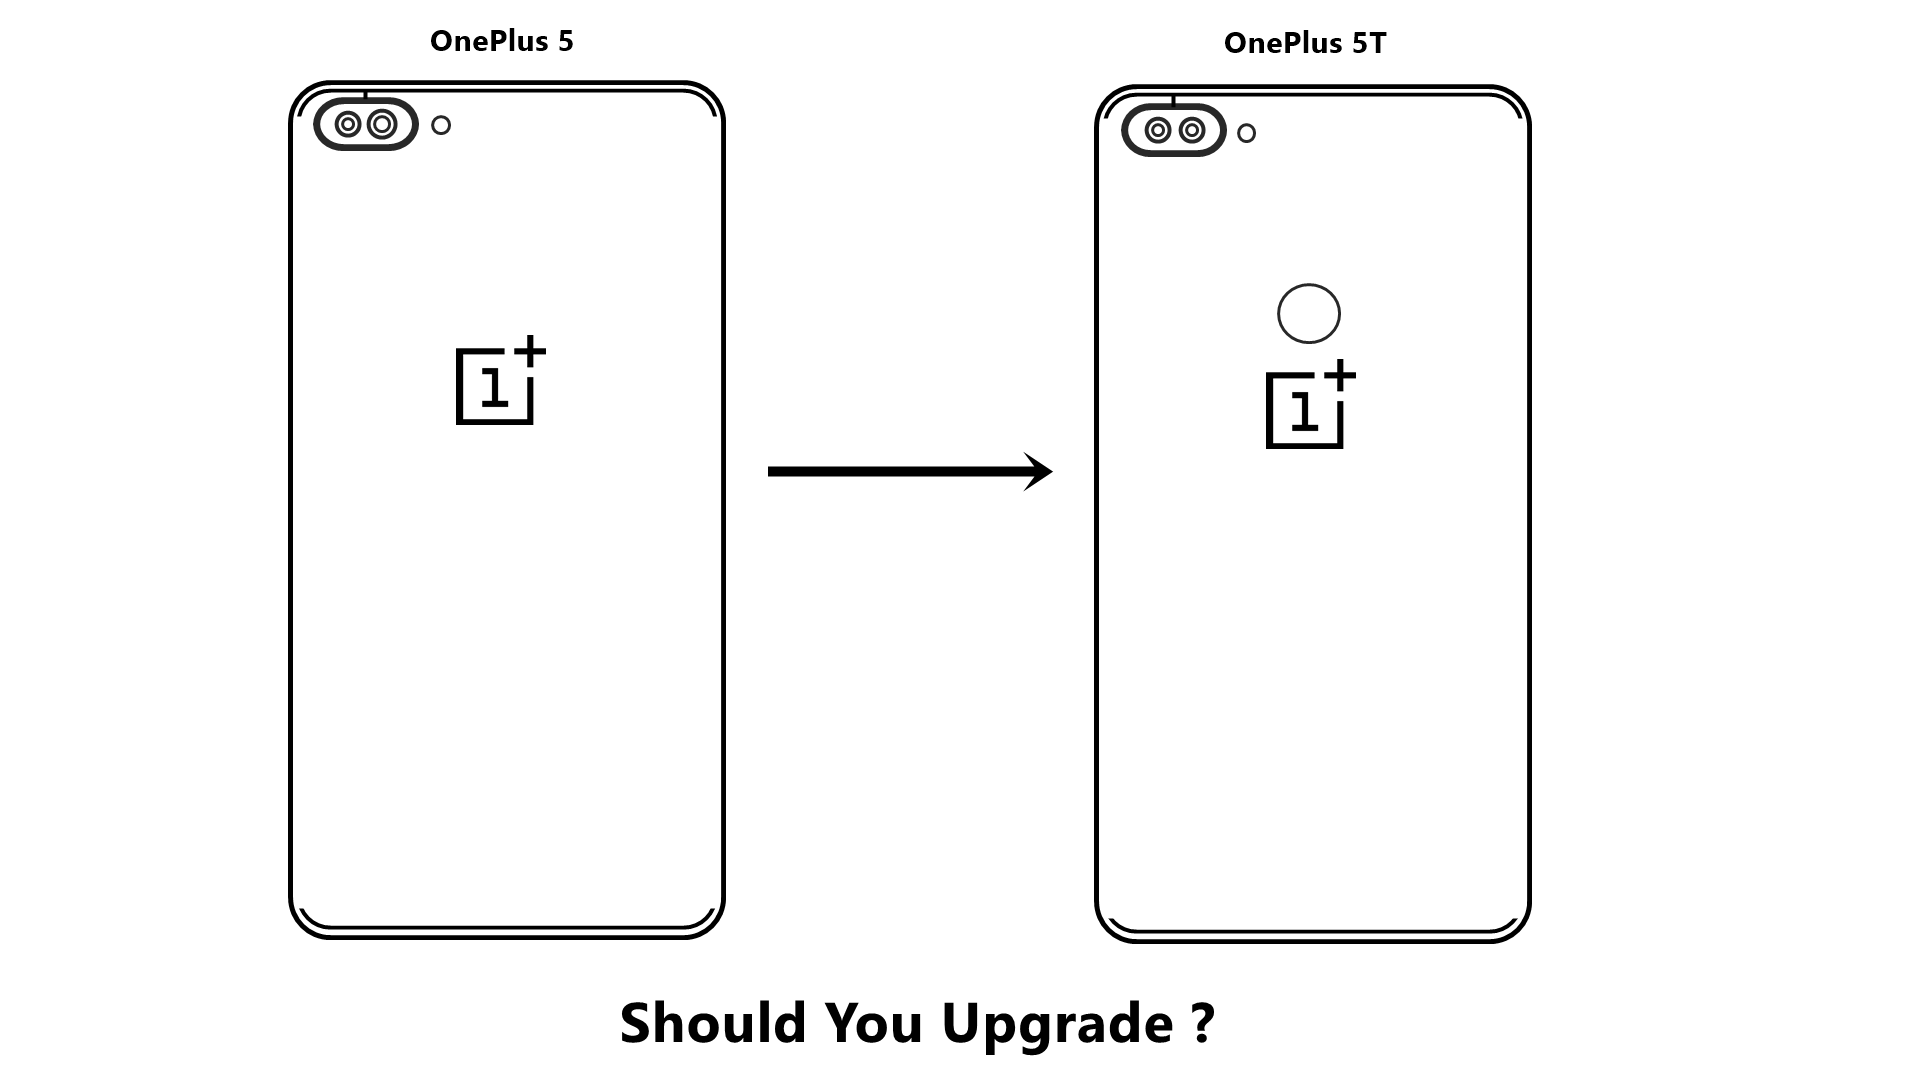 OnePlus 5T vs. OnePlus 5 - Should You Upgrade